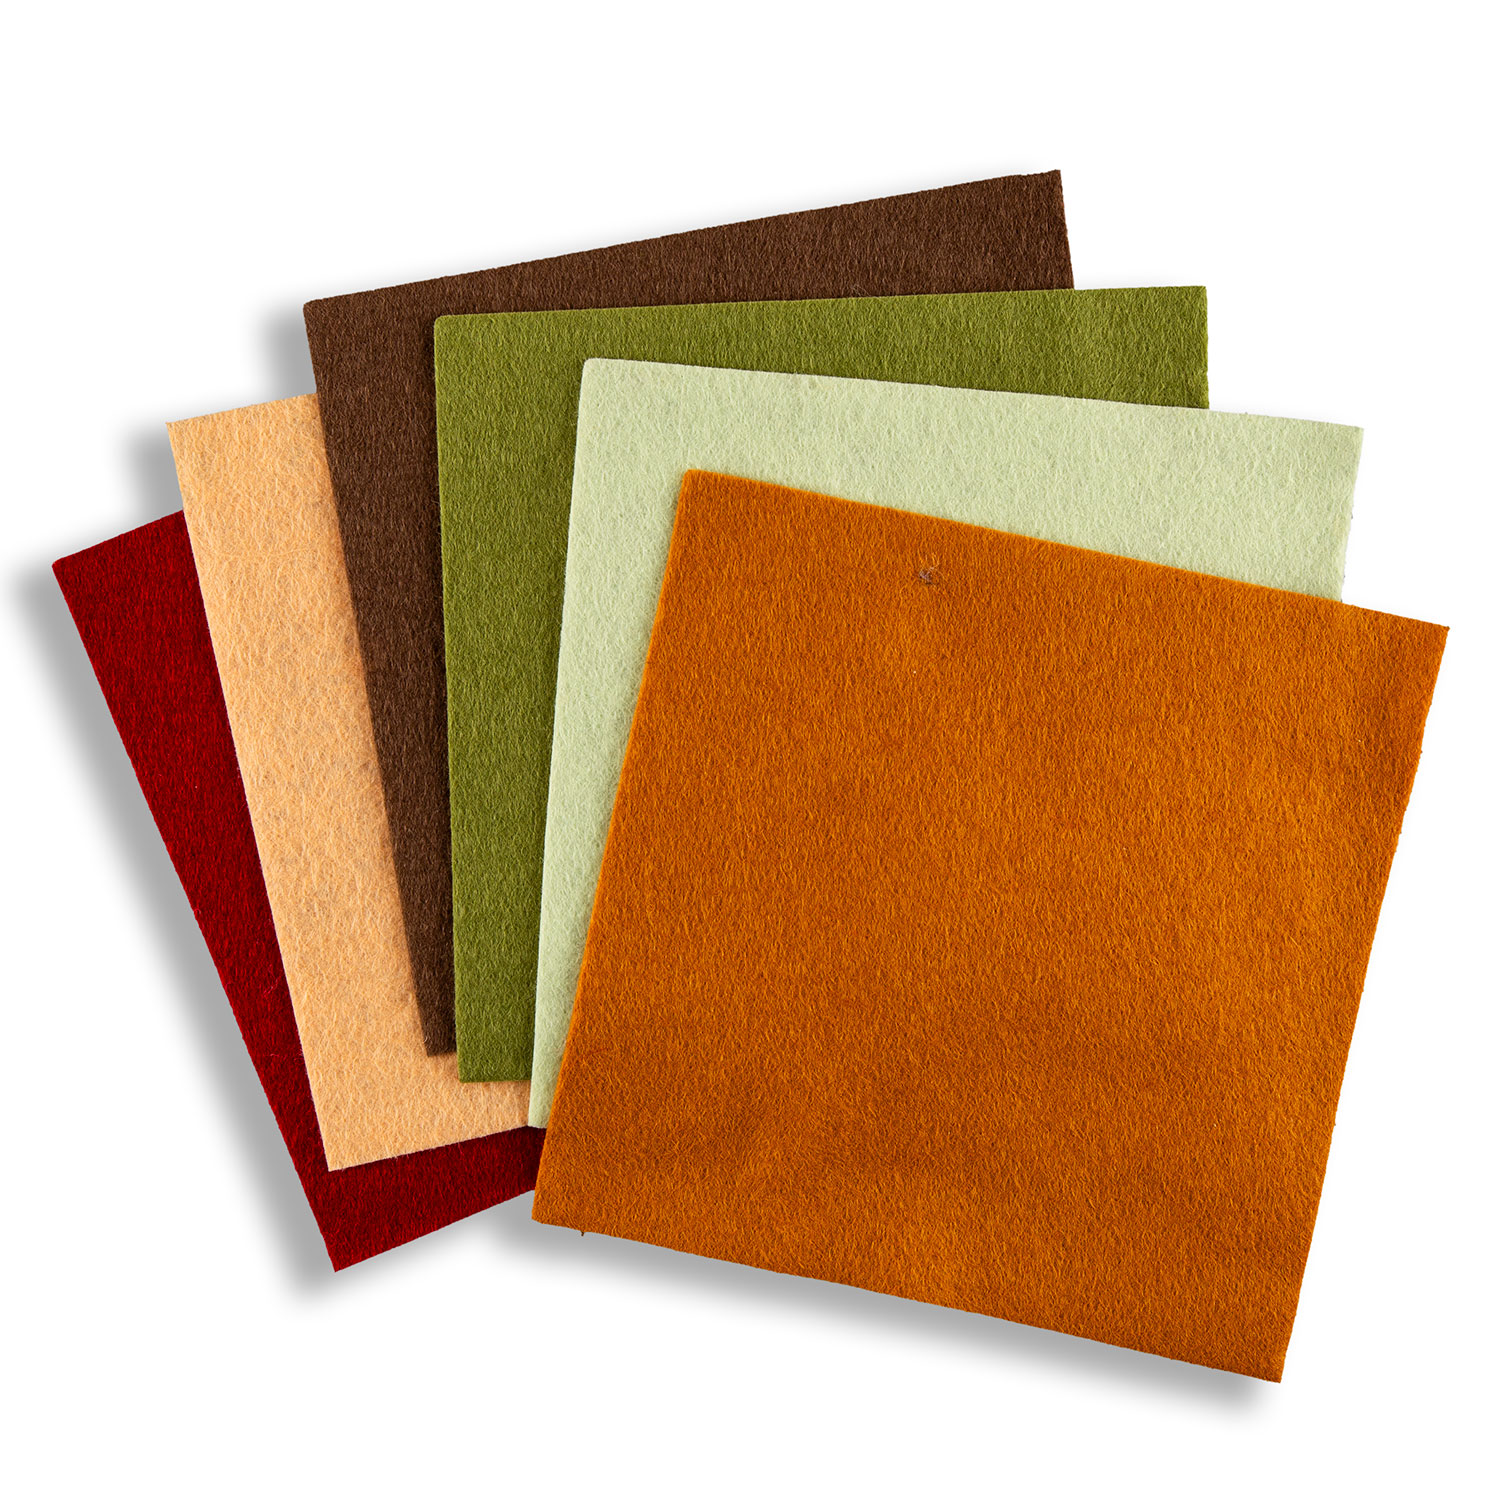 Felt by Clarity Pack of 6 Non-Adhesive Mixed Colour Felt 6x6" Squares Pick N Mix - Pick Any 2 - Funky Christmas Tree